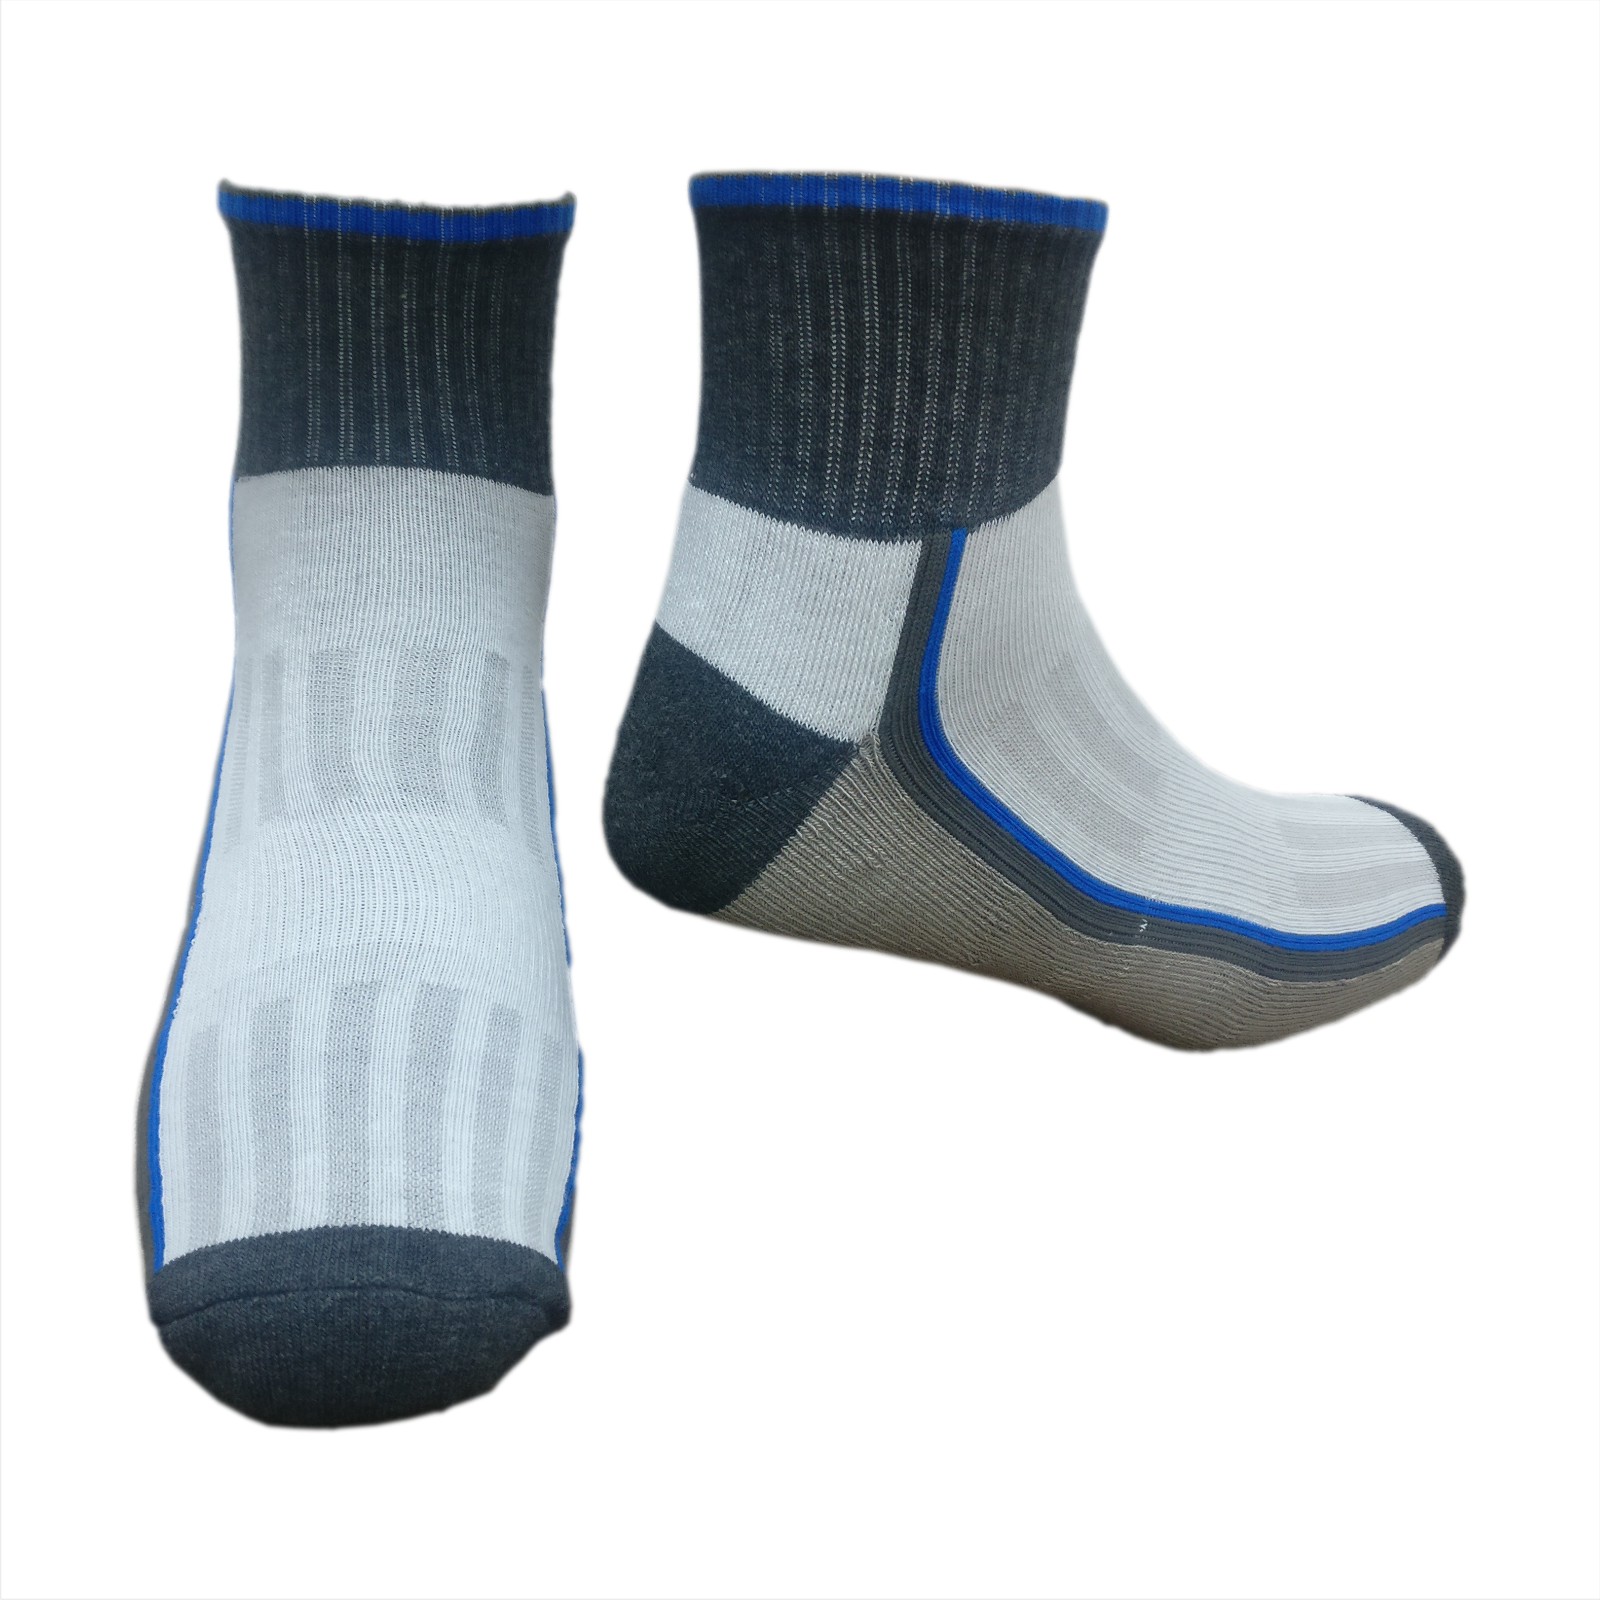 Abhitex Knitters pvt. Ltd | Private label socks manufacturer | Contract ...